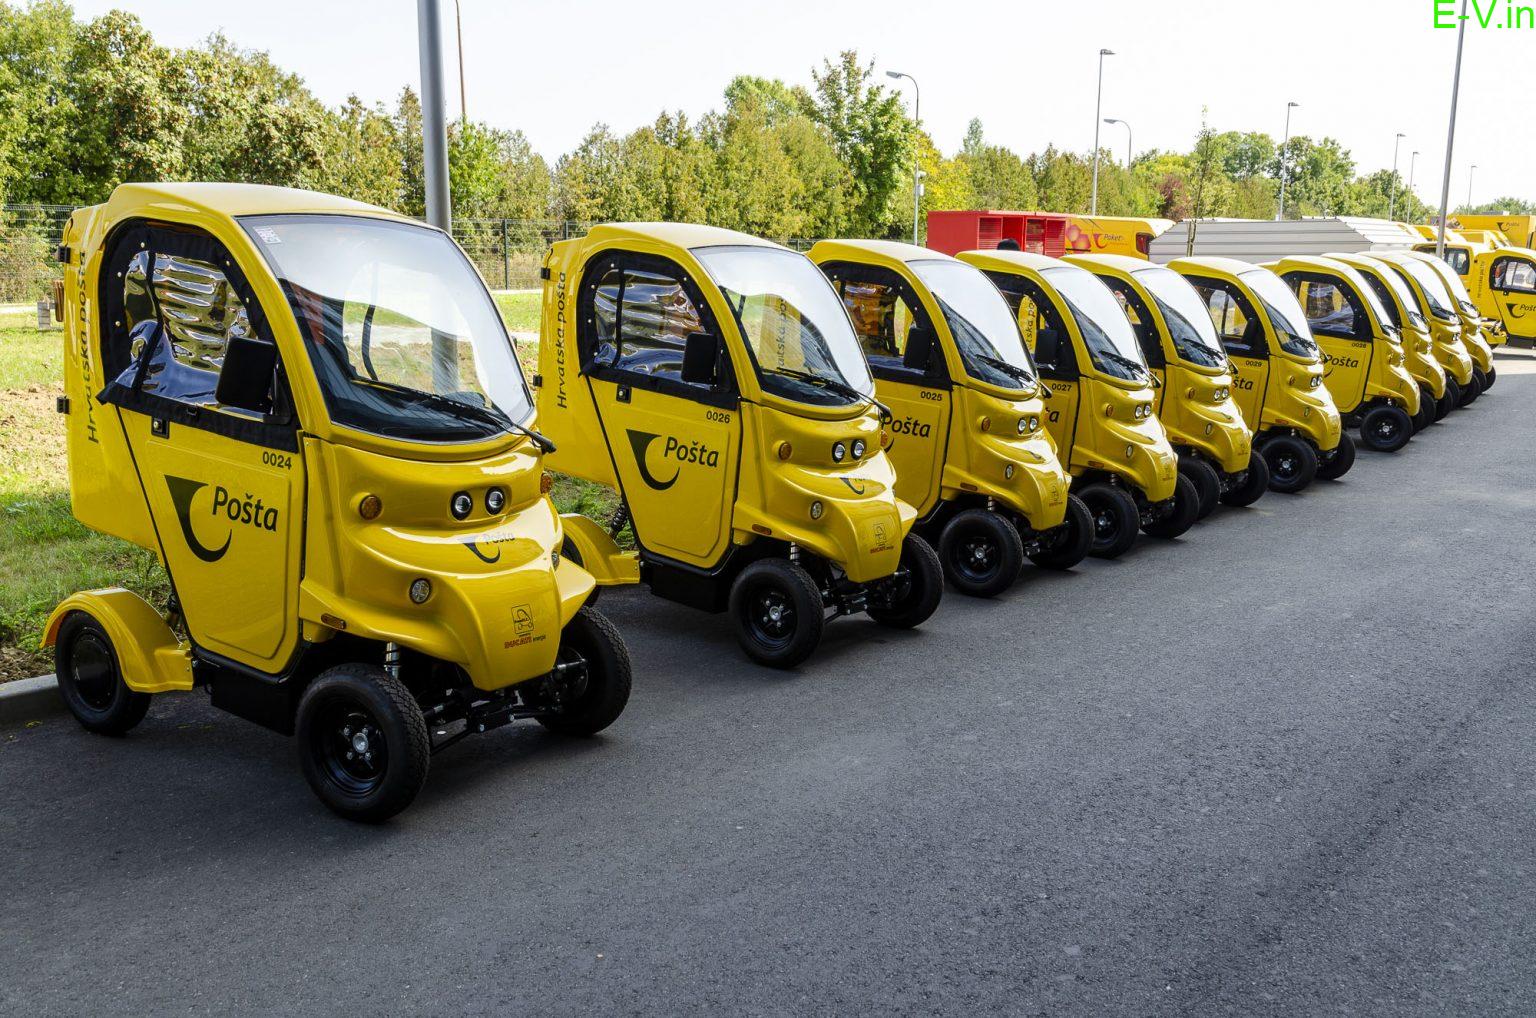 Croatian Post added 20 new electric vehicles